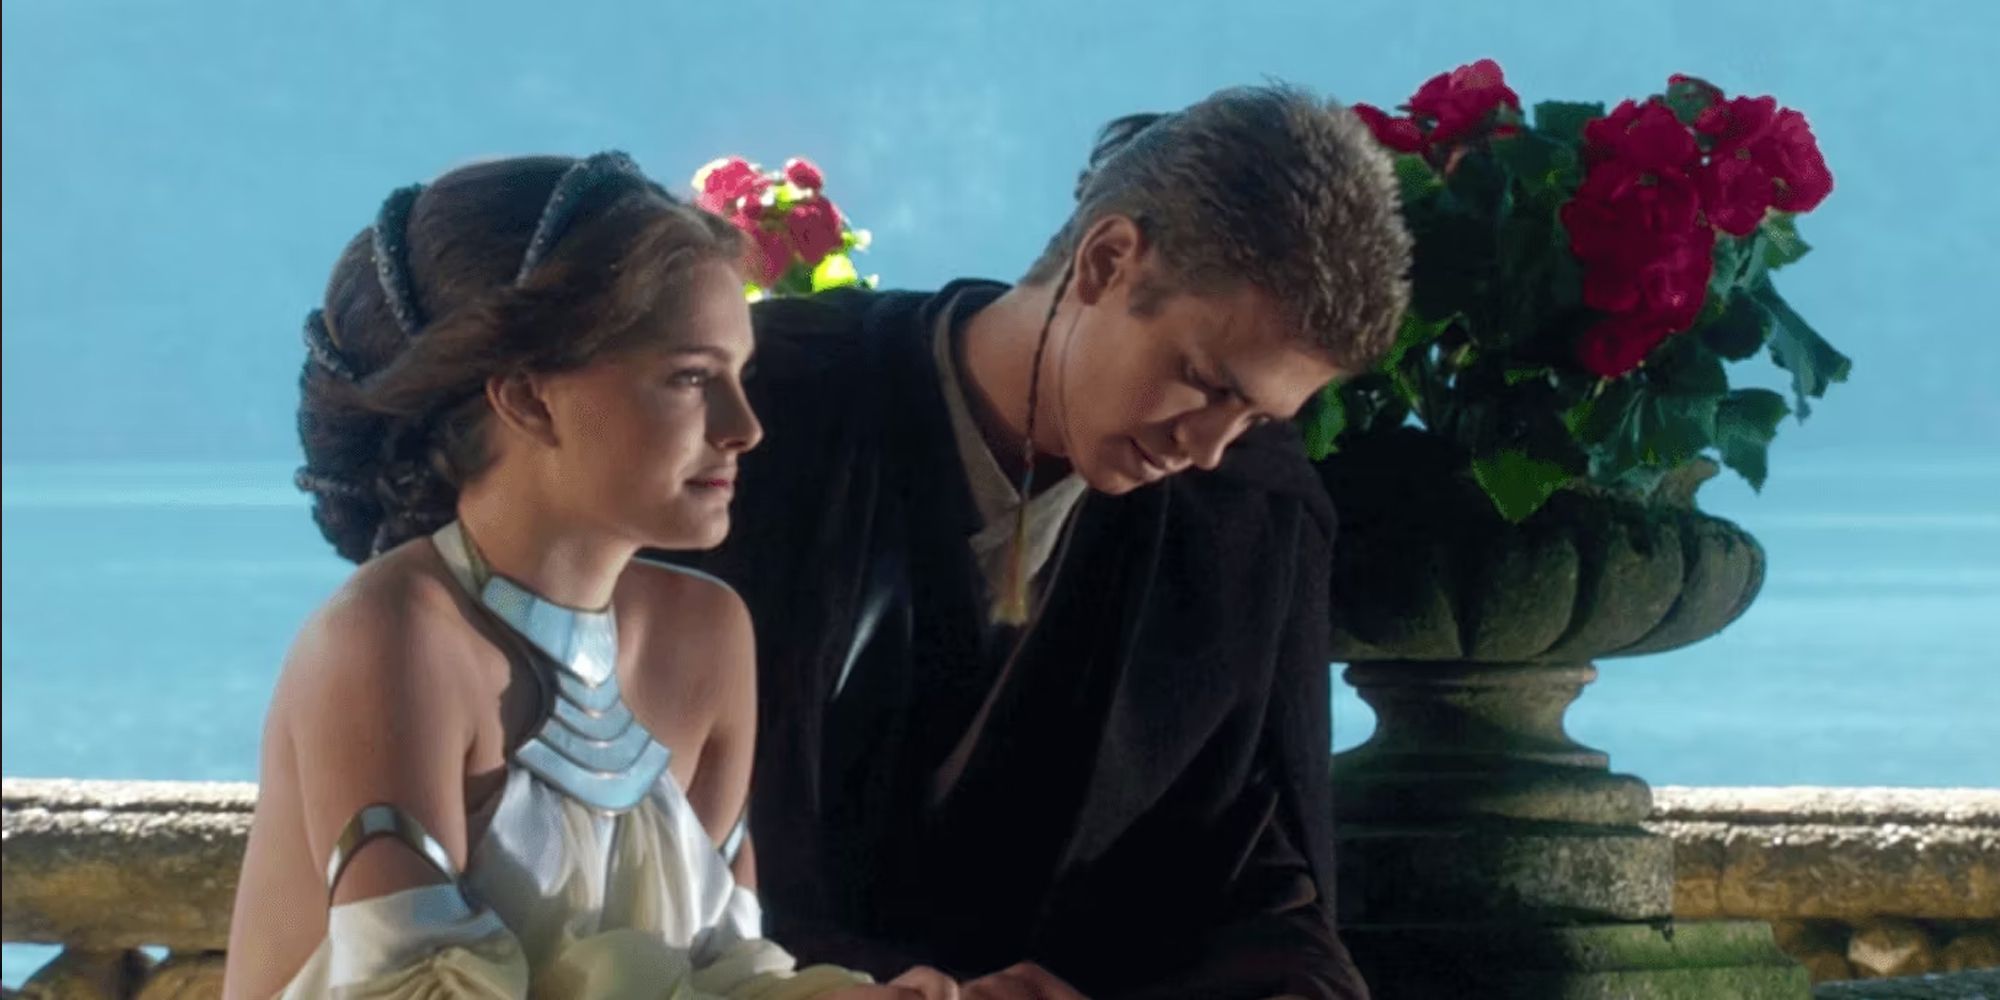 Padme Amidala and Anakin Skywalker in Attack of the Clones